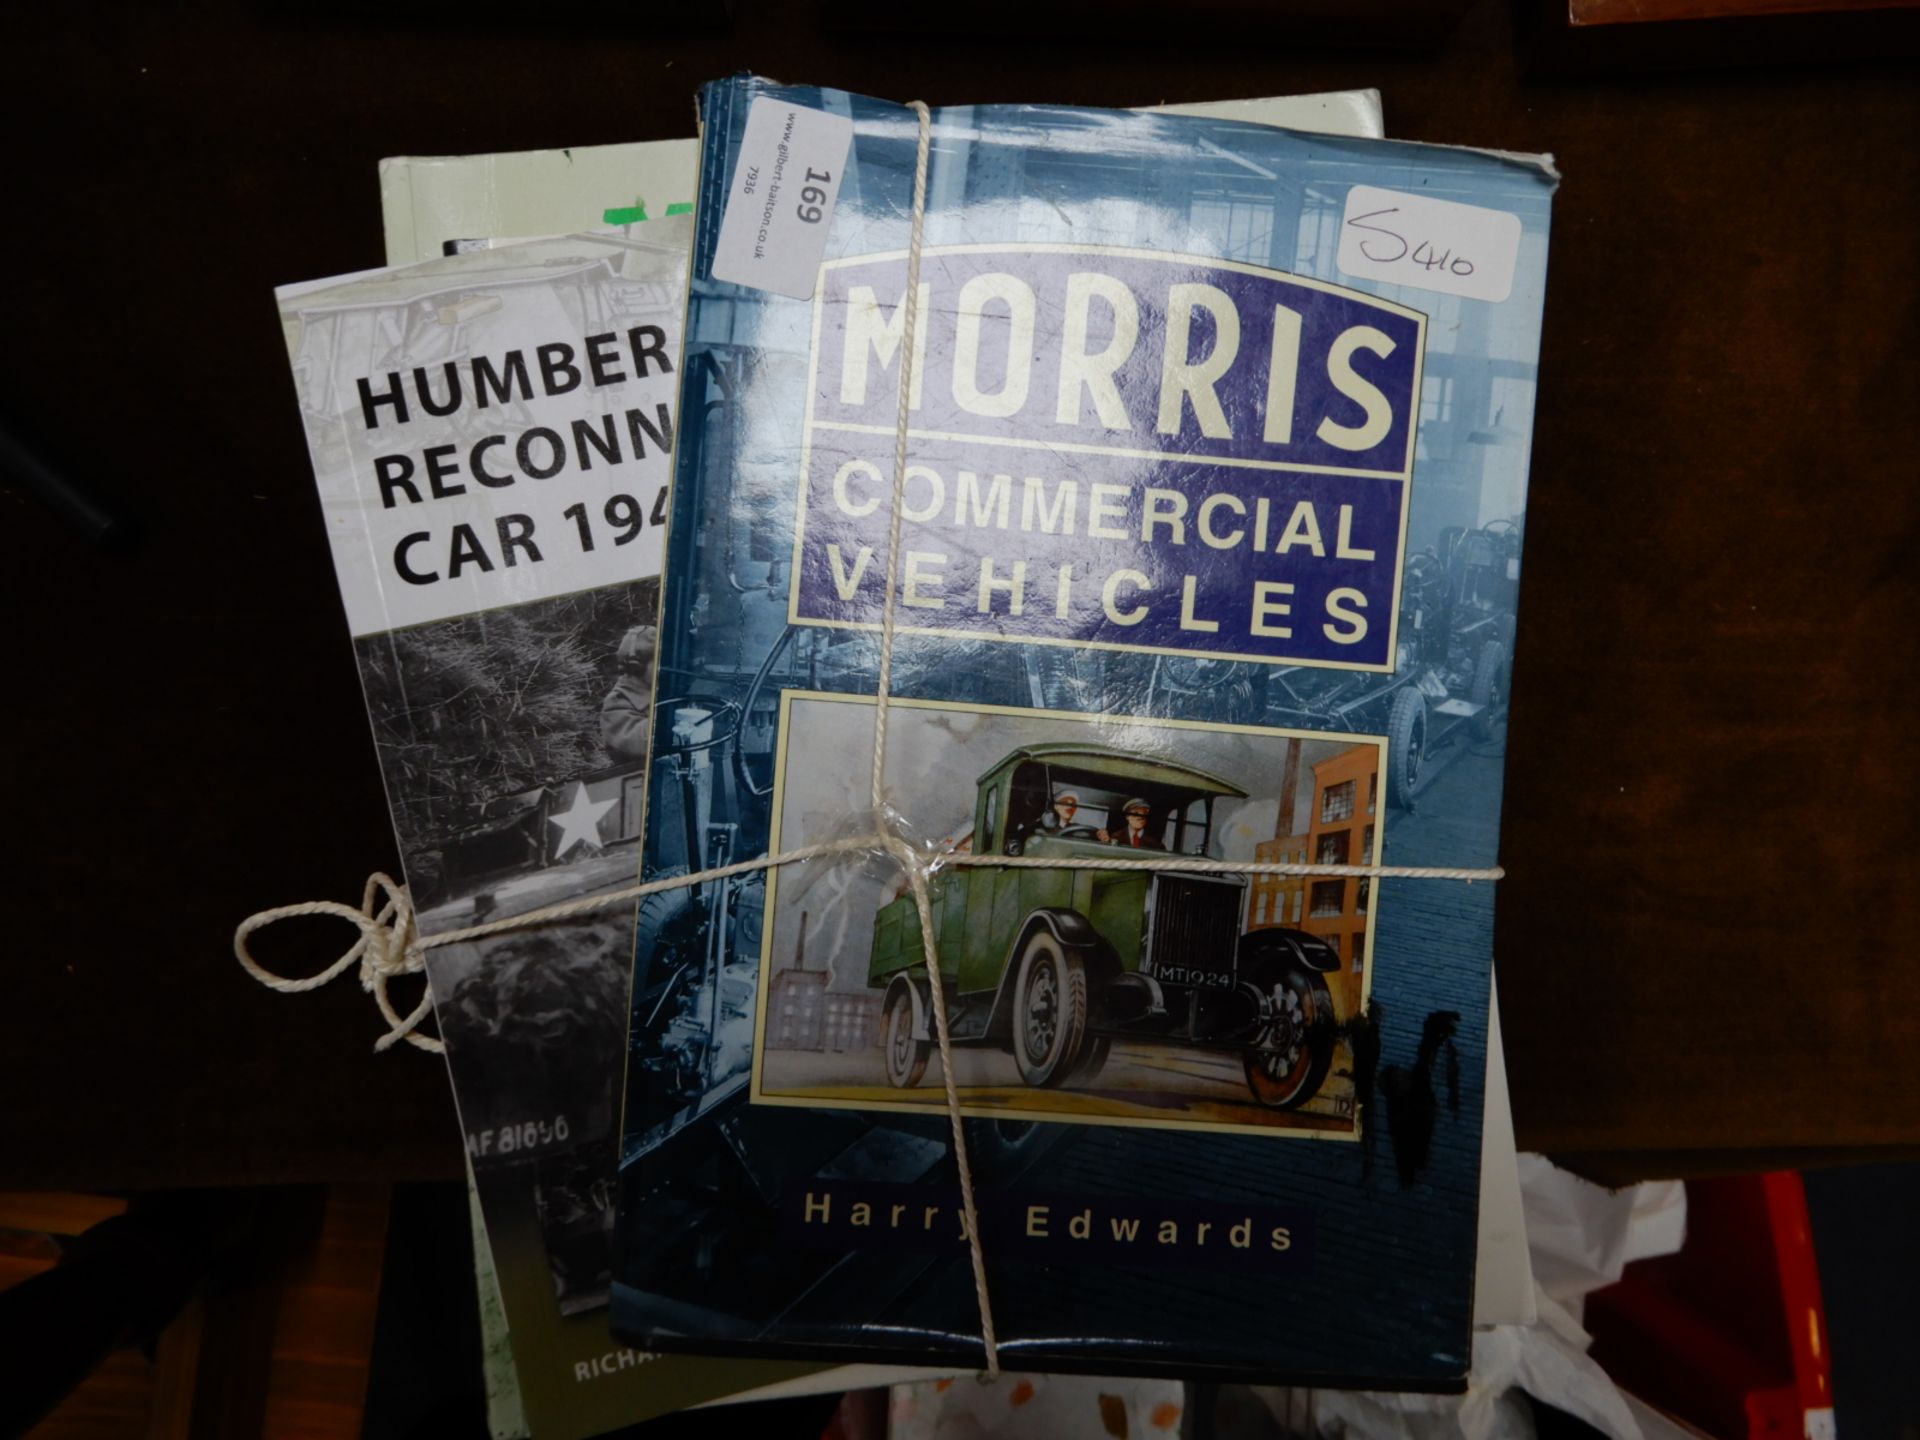 Selection of Books - Morris Commercial Vehicles, H